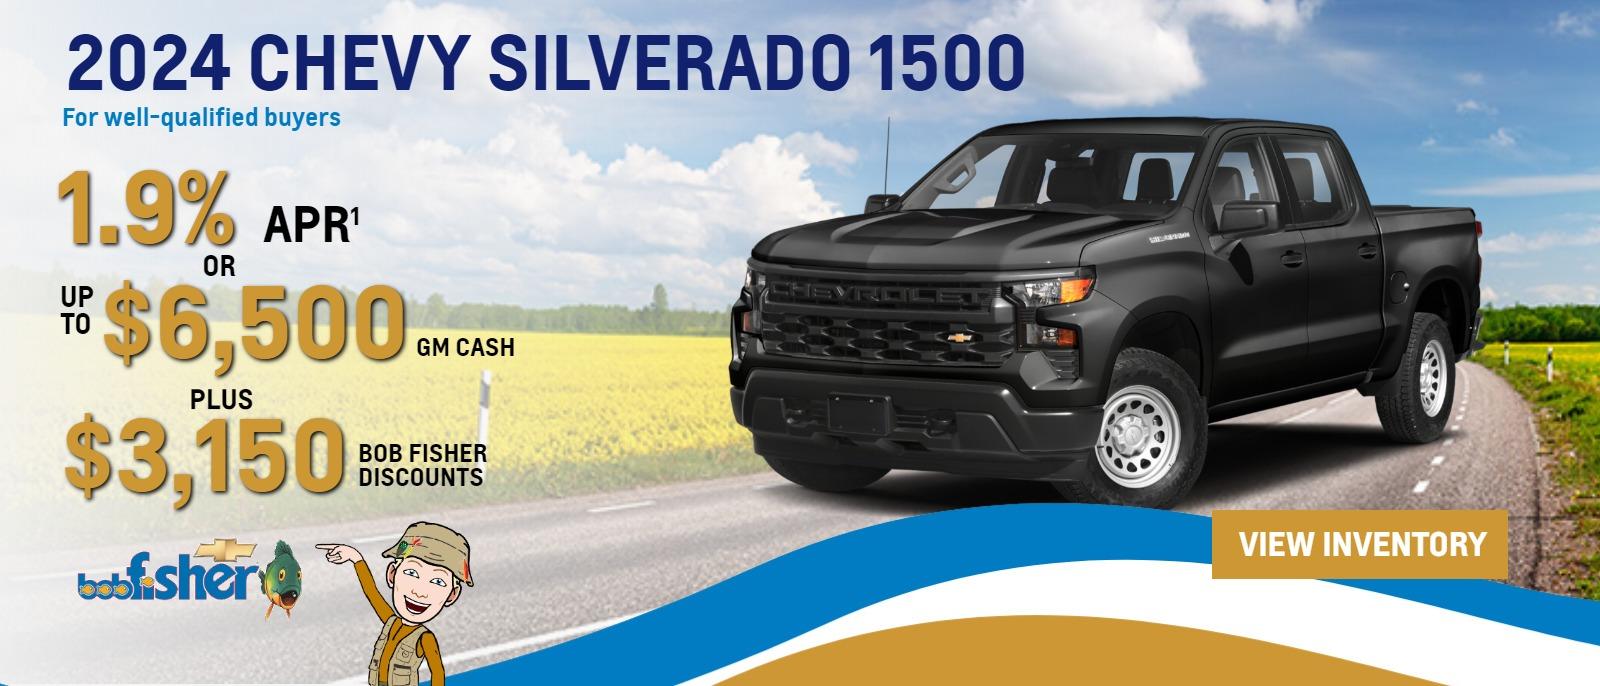 2024 CHEVY SILVERADO 1500 CREW CAB LT
For Well-Qualified Buyers
1.9% APR
or
$6,500 GM Cash
PLUS
$3,150 Bob Fisher Discounts